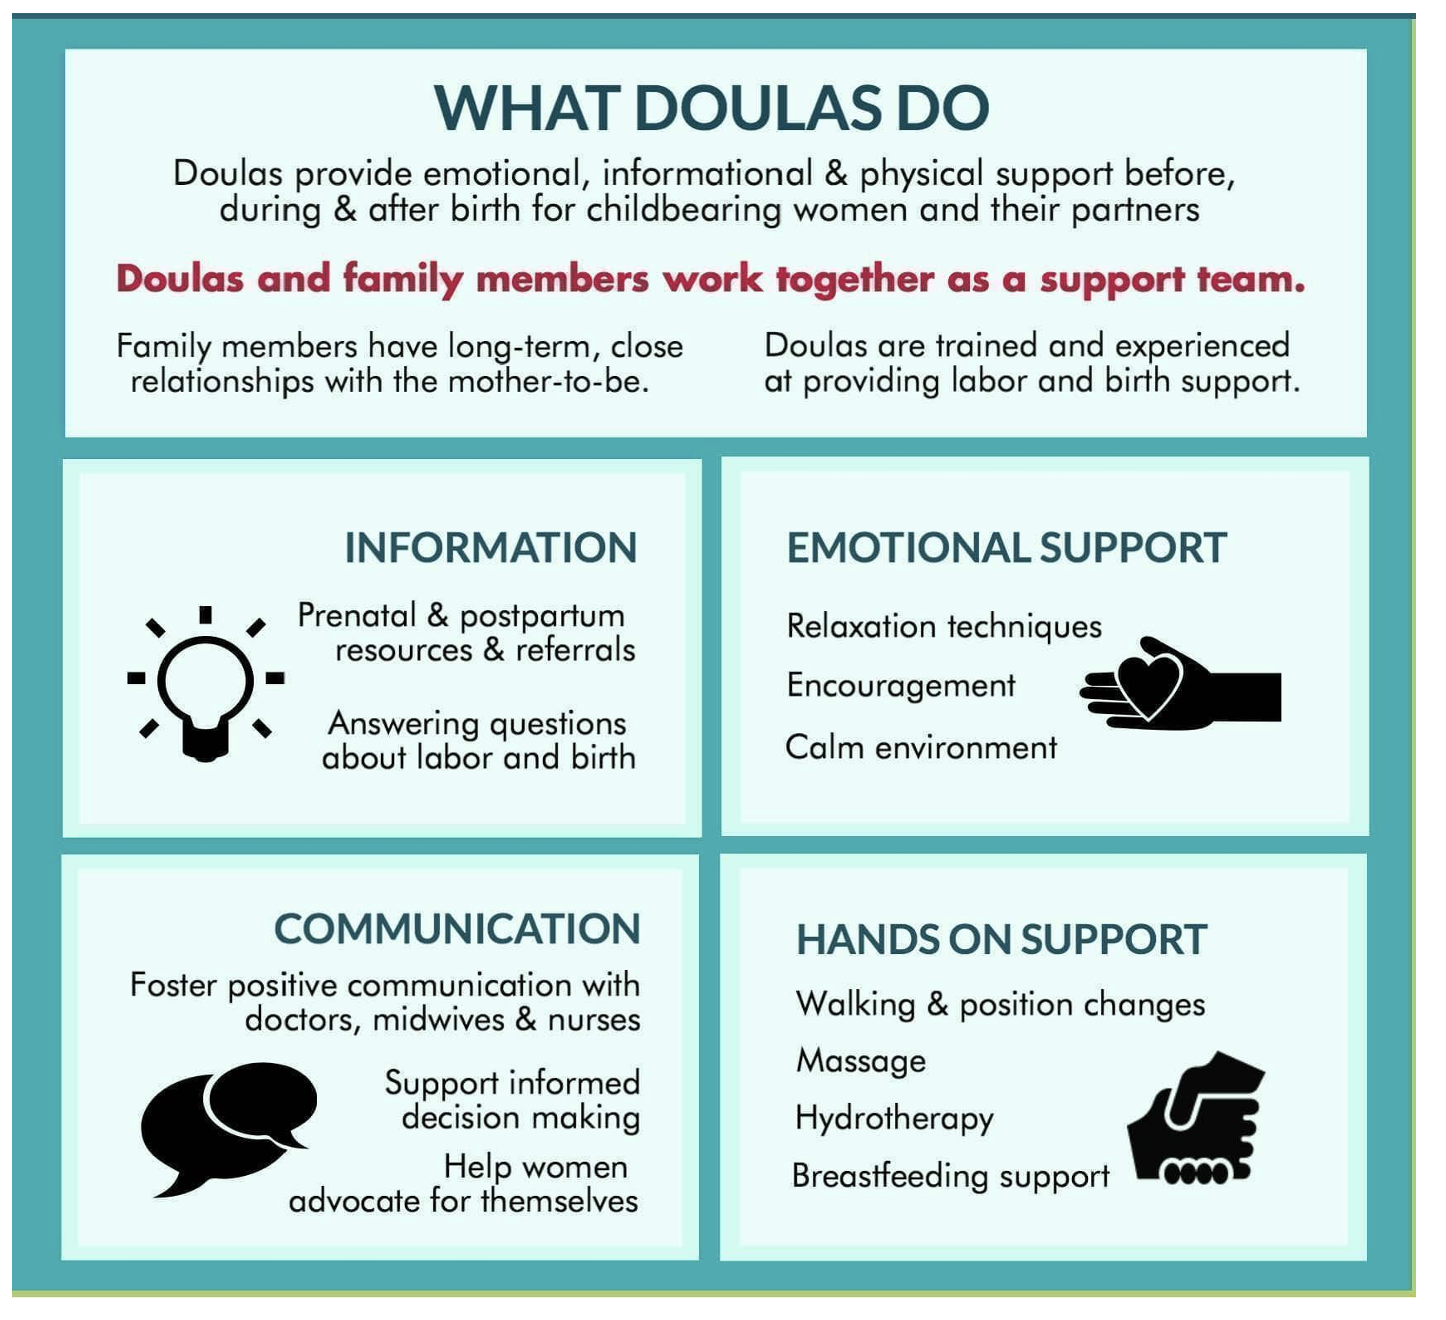 YOU CAN HAVE A DOULA!